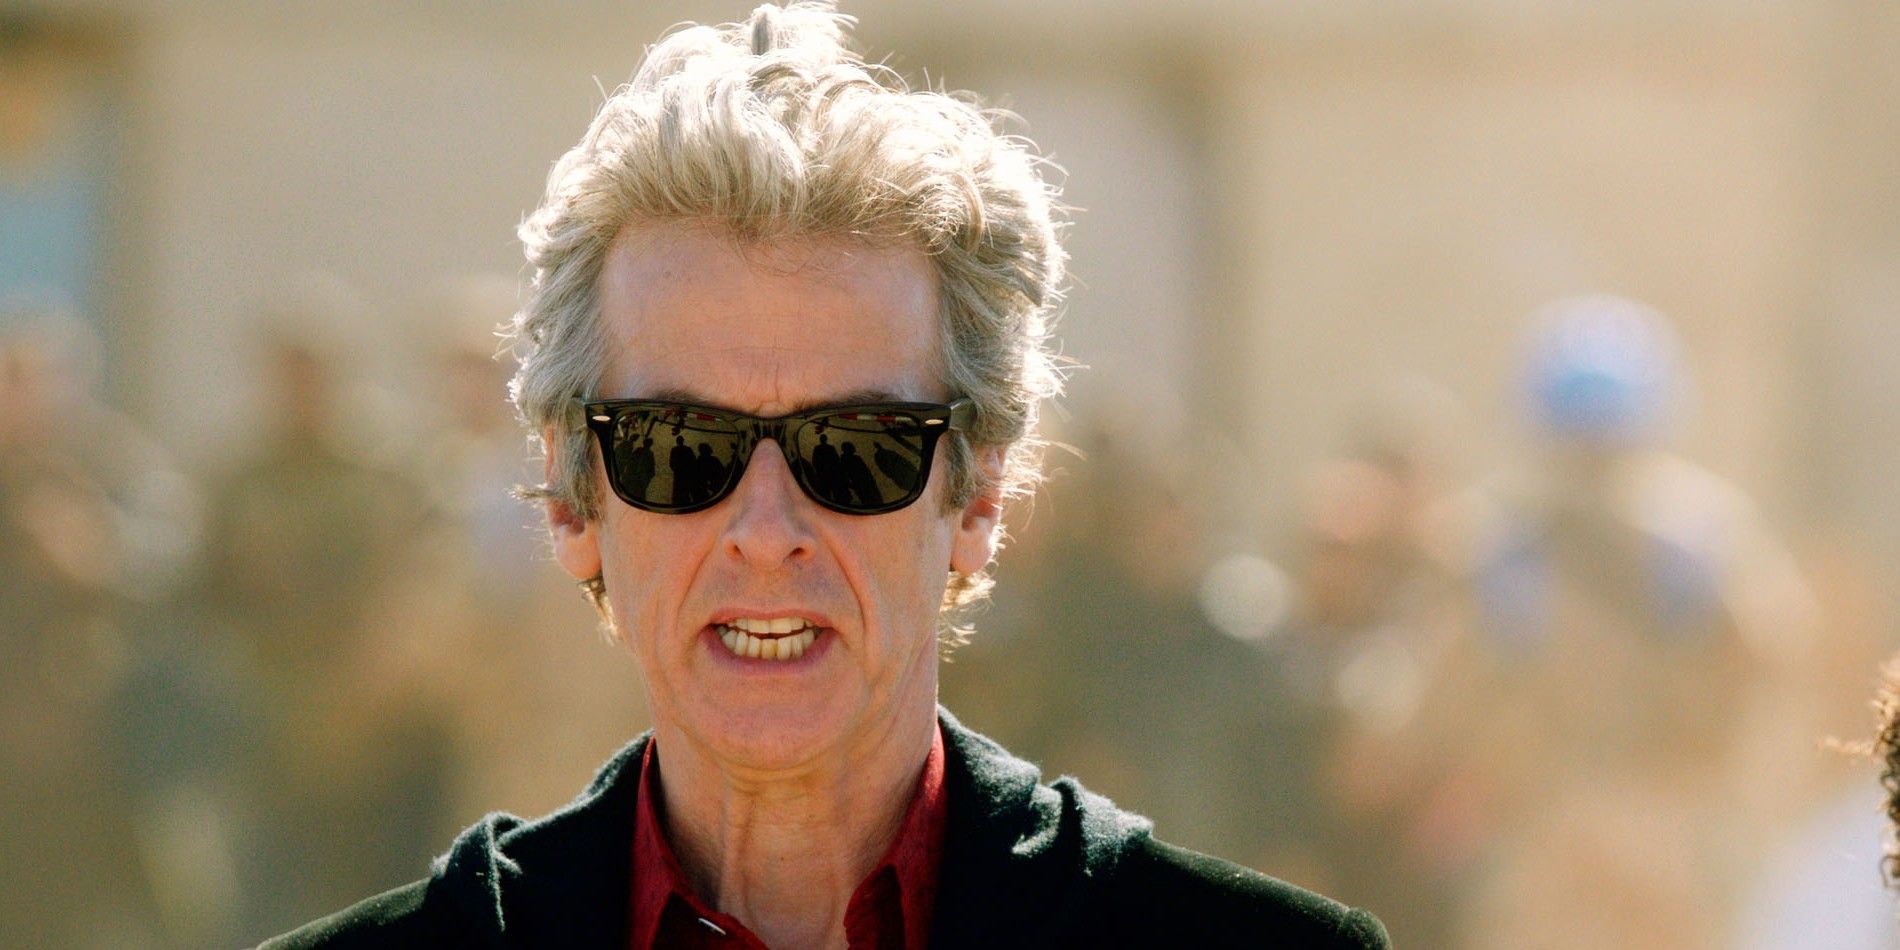 Doctor Who Feature – The Twelfth Doctor Era: Is Peter Capaldi the